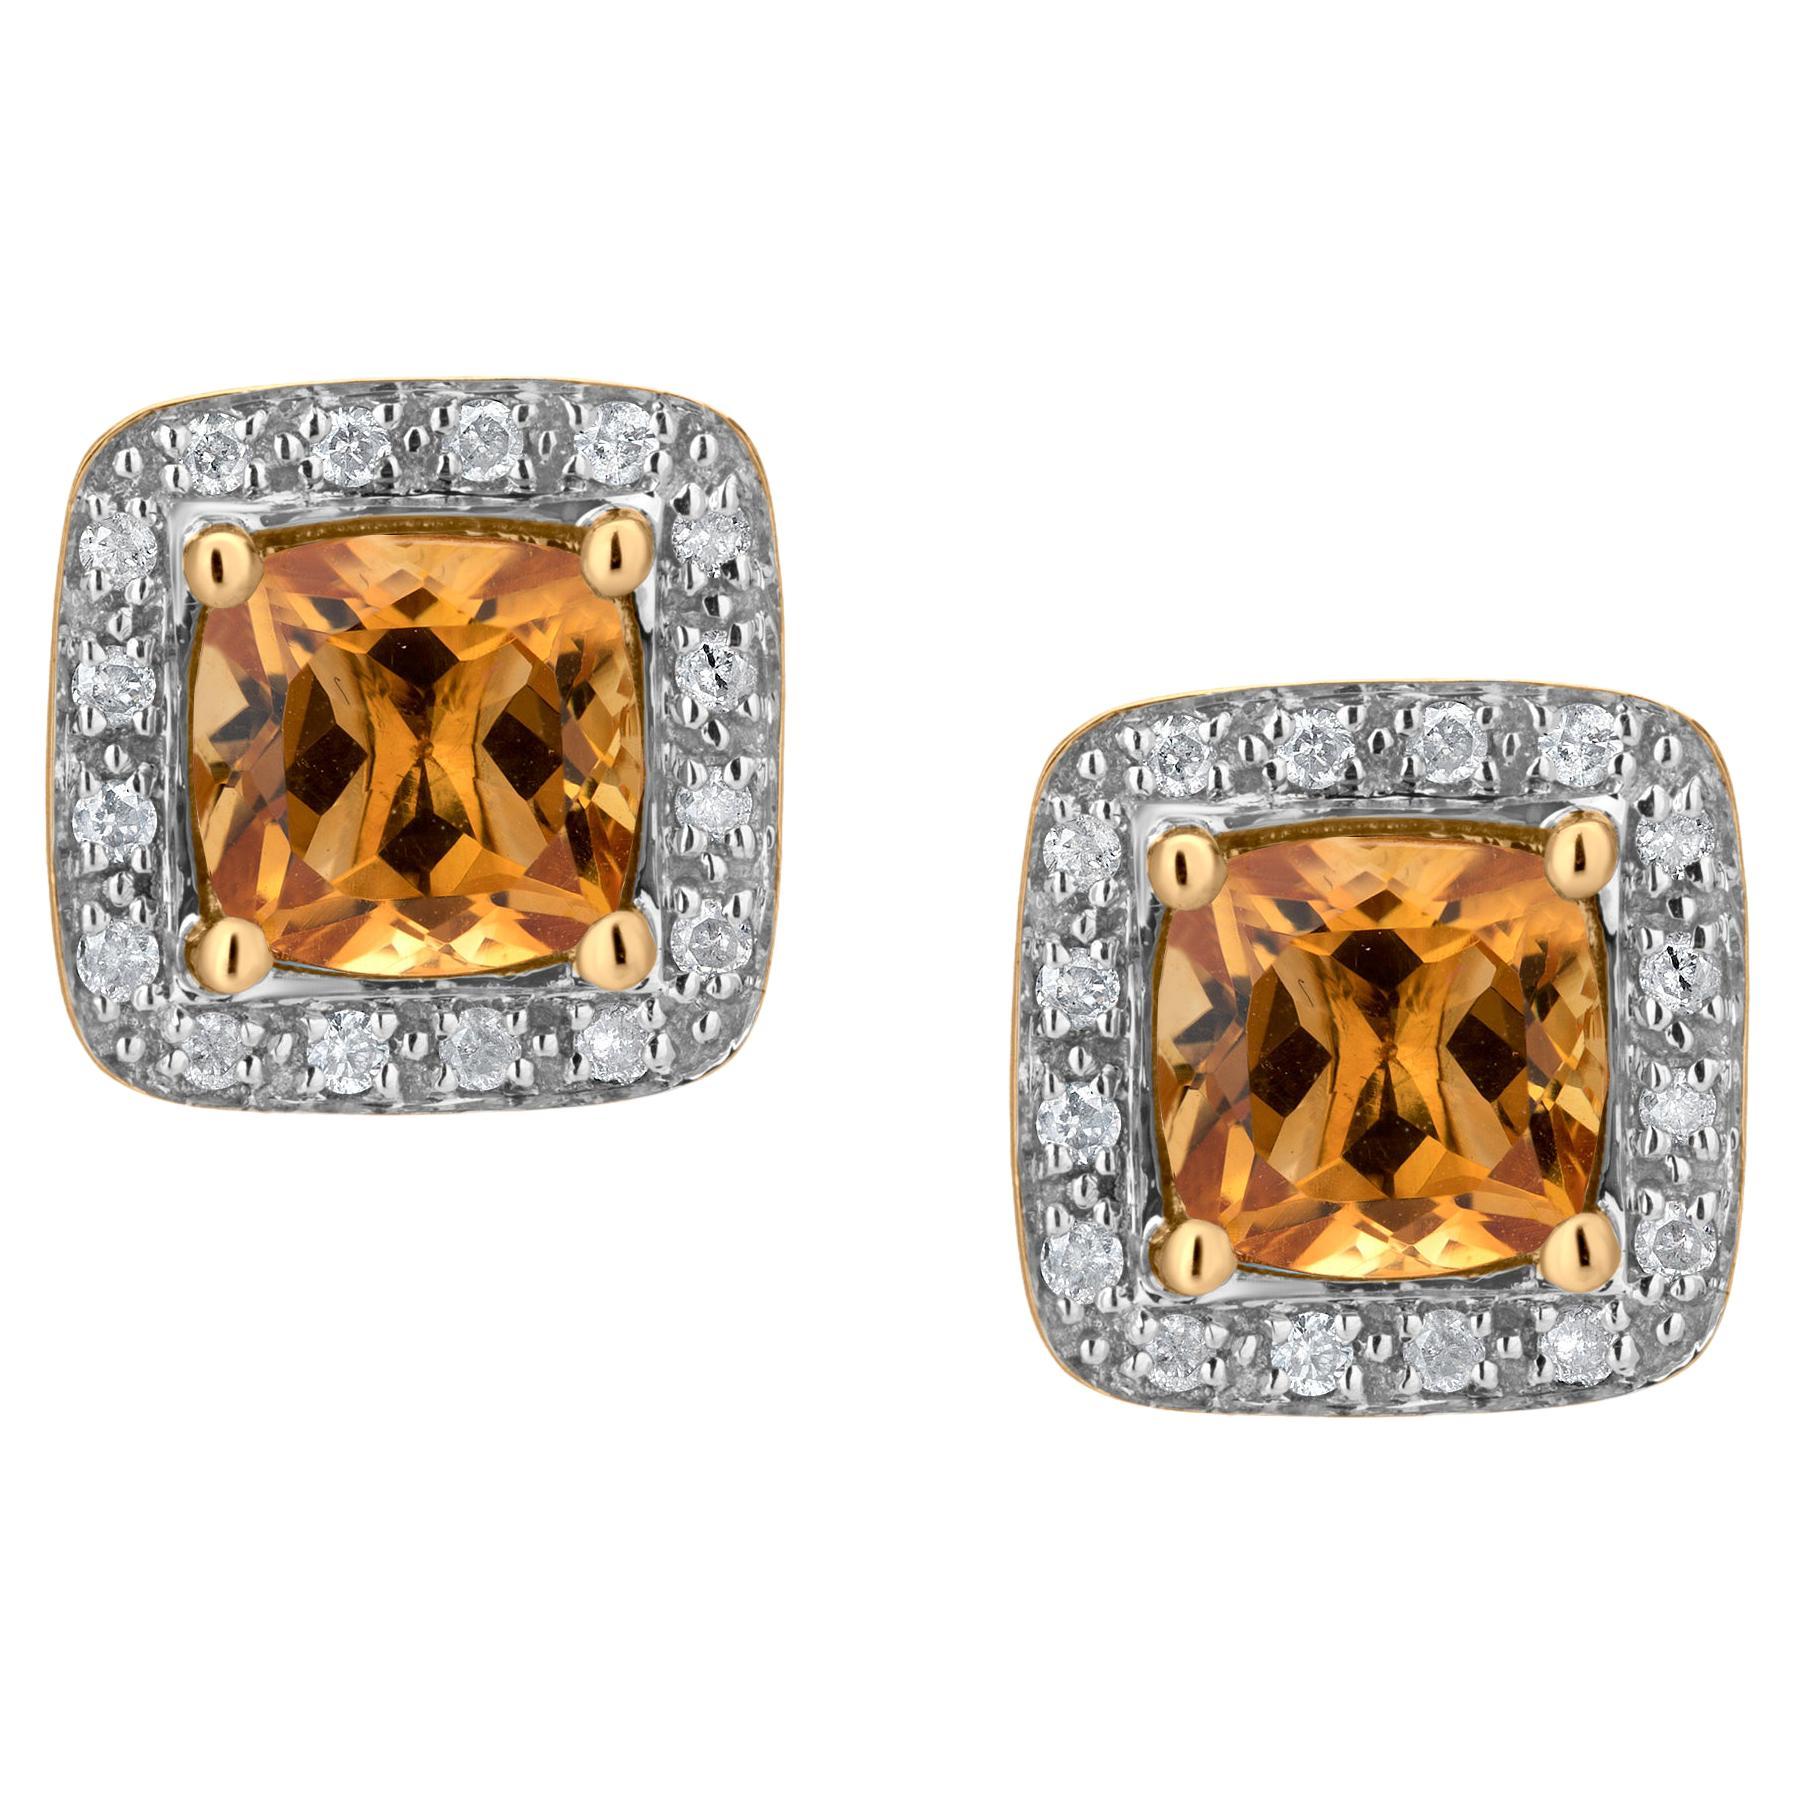 Gemistry 1.78ct, Cushion Citrine Stud Earrings with Diamond Accents in 14k Gold